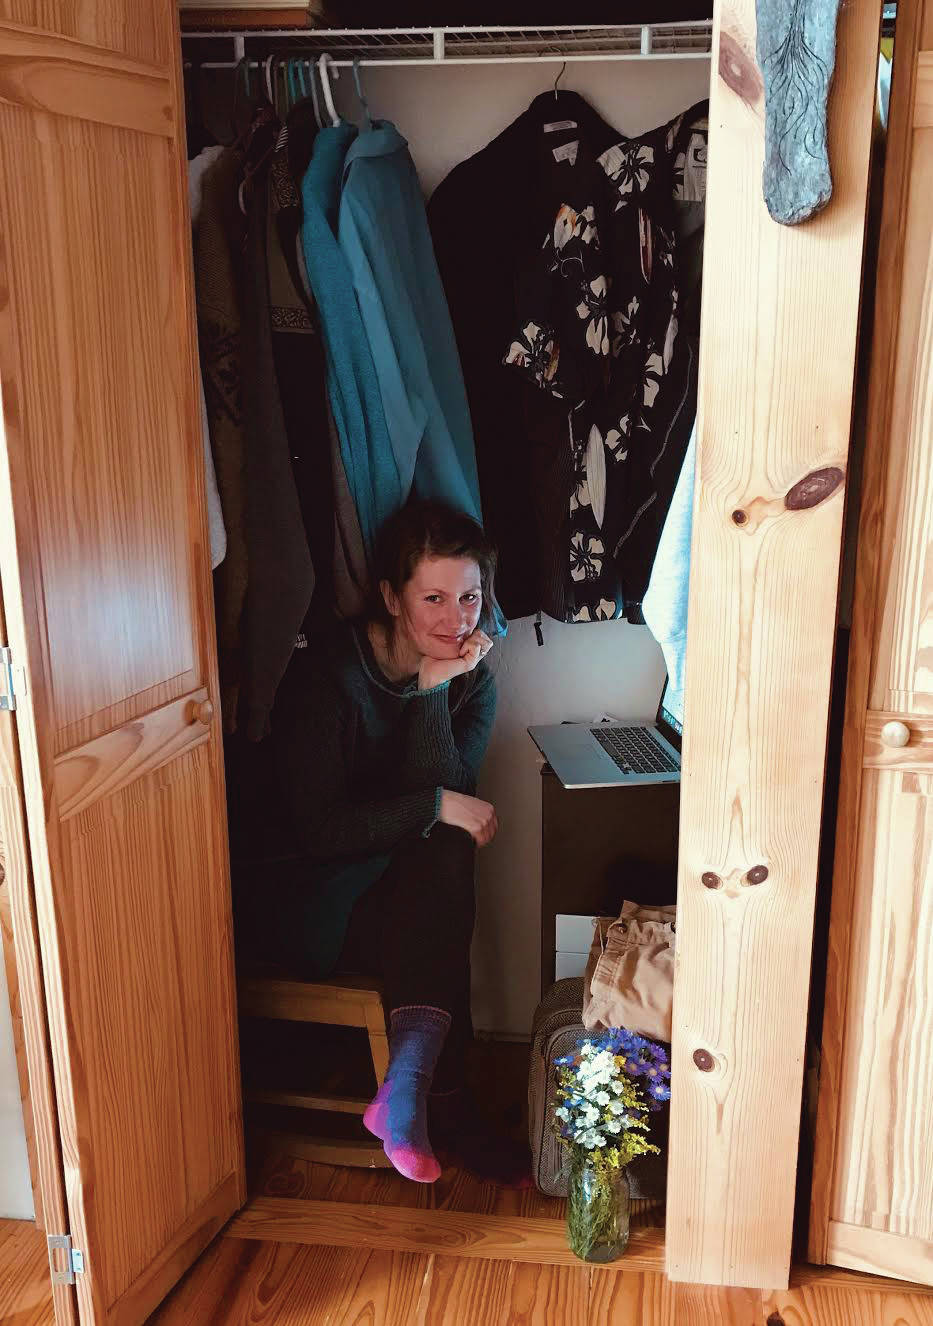 Sarah Brewer, who plays Gwendolyn Fairfax in “The Importance of Being Earnest,” demonstrates her recording studio in the closet of her home in this undated photo in Homer, Alaska. (Photo courtesy of Jennifer Norton)